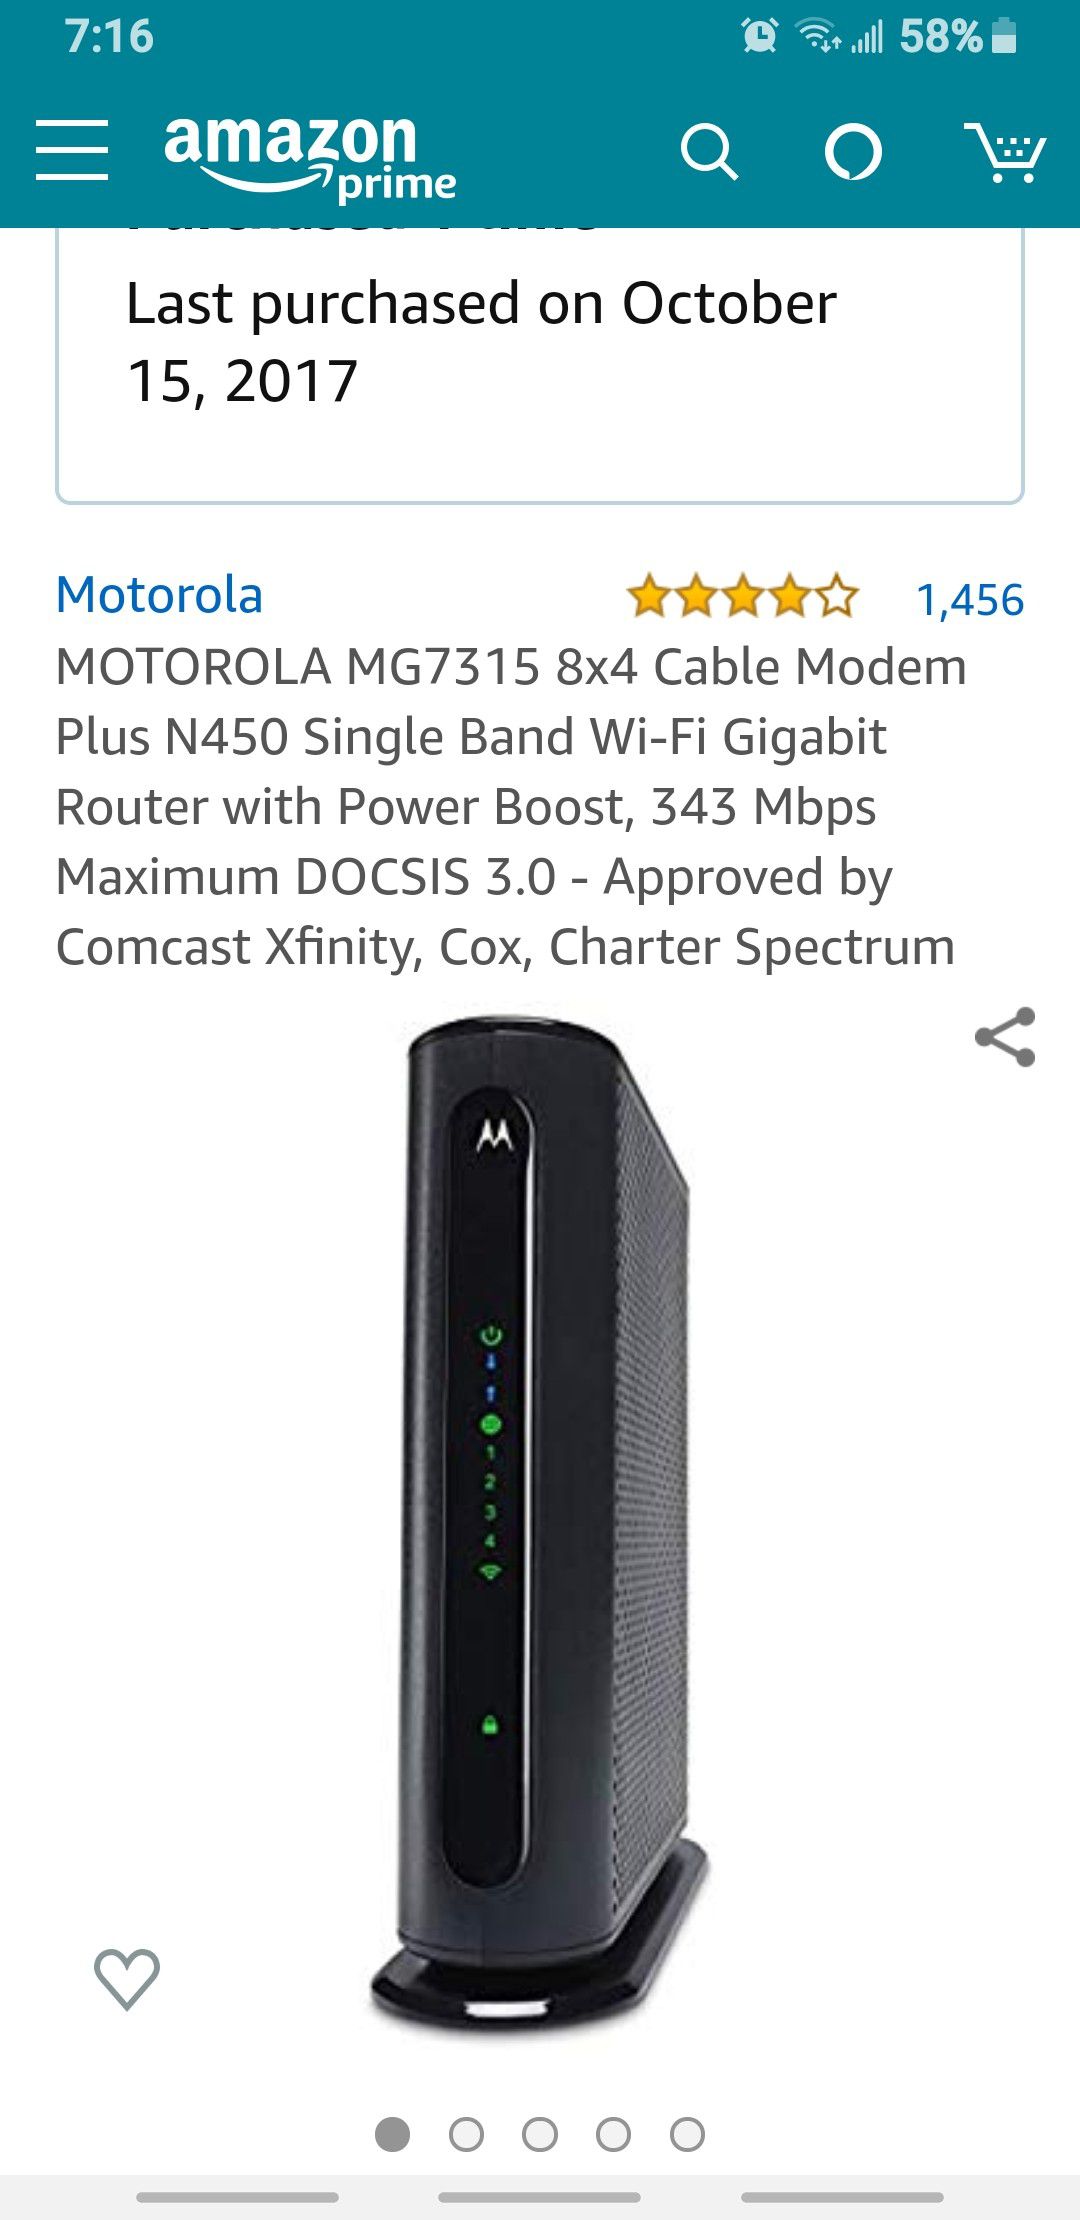 Motorola Cable Modem DOCS 3.0 still available as of 11-22-19